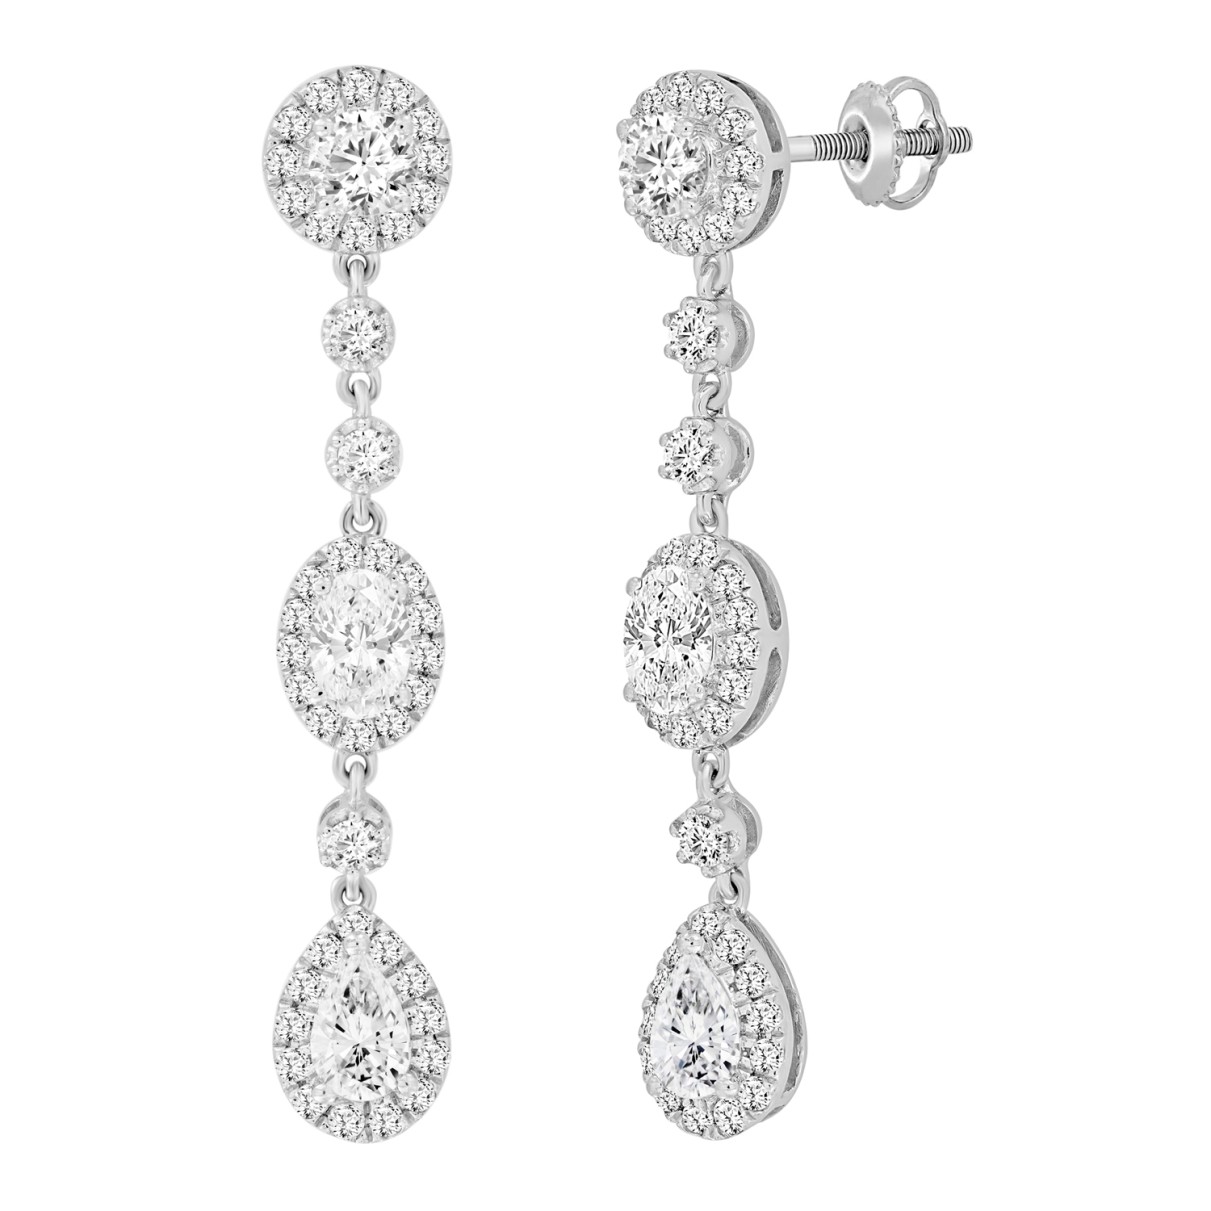 LINEAR EARRINGS 3 1/2CT OVAL/ROUND/PEAR DIAMOND 14K WHITE GOLD